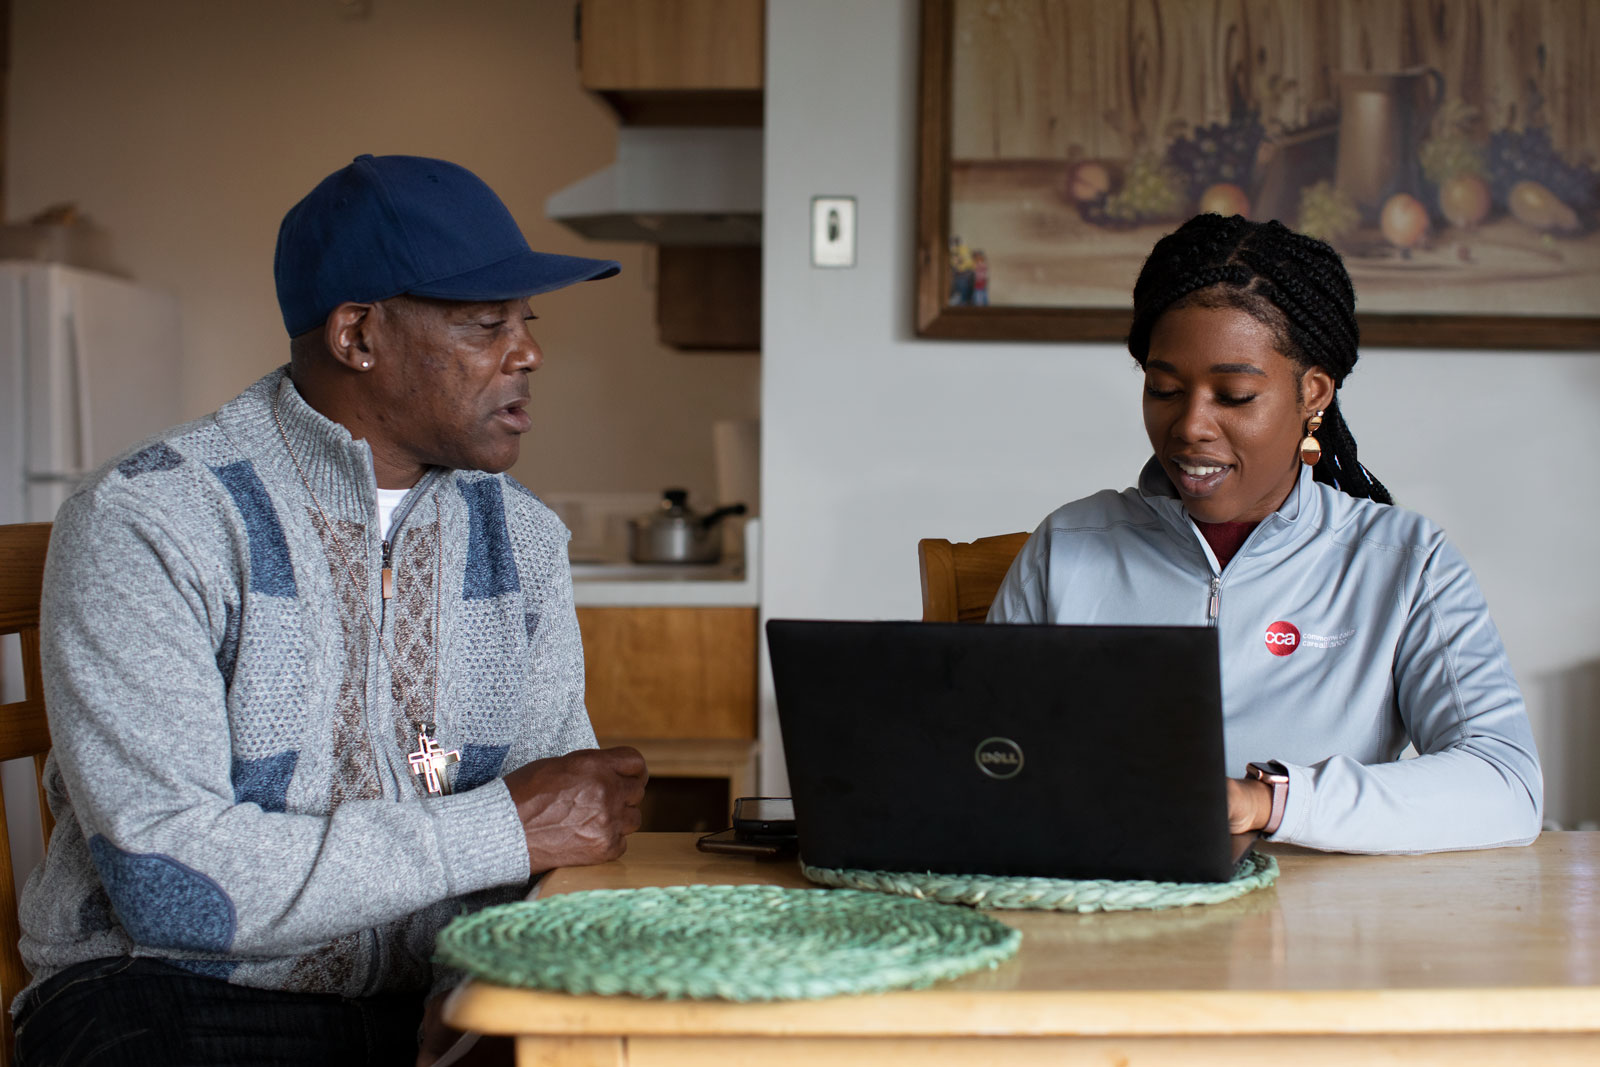 Female care partner with laptop and male member with blue baseball cap sitting at his home kitchen table